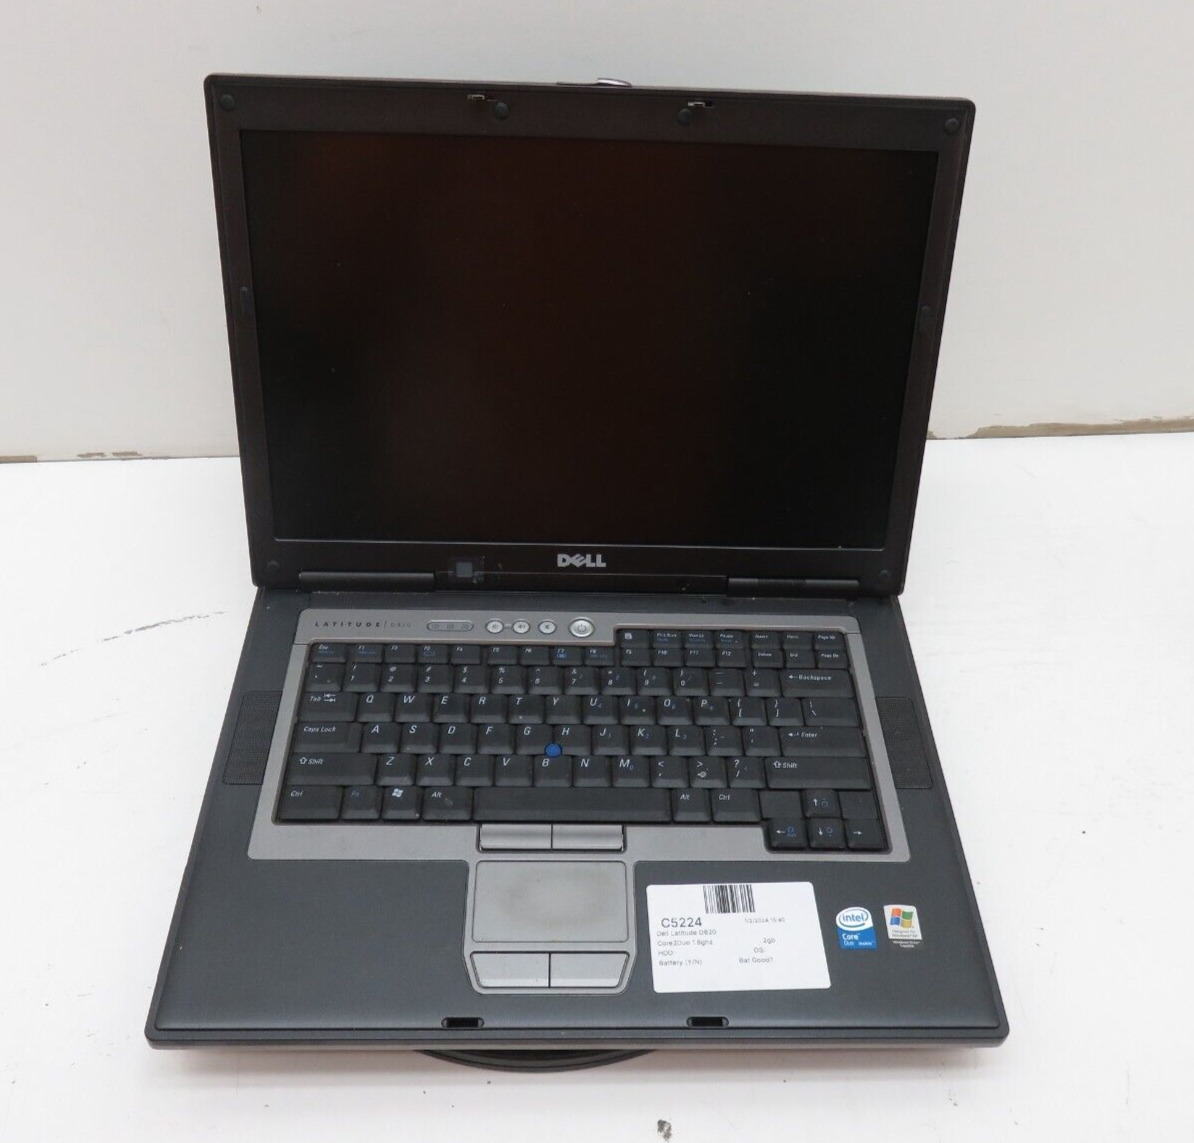 Dell Latitude D820 Laptop Intel Core 2 Duo 2GB Ram No HDD or Battery -Dim Screen